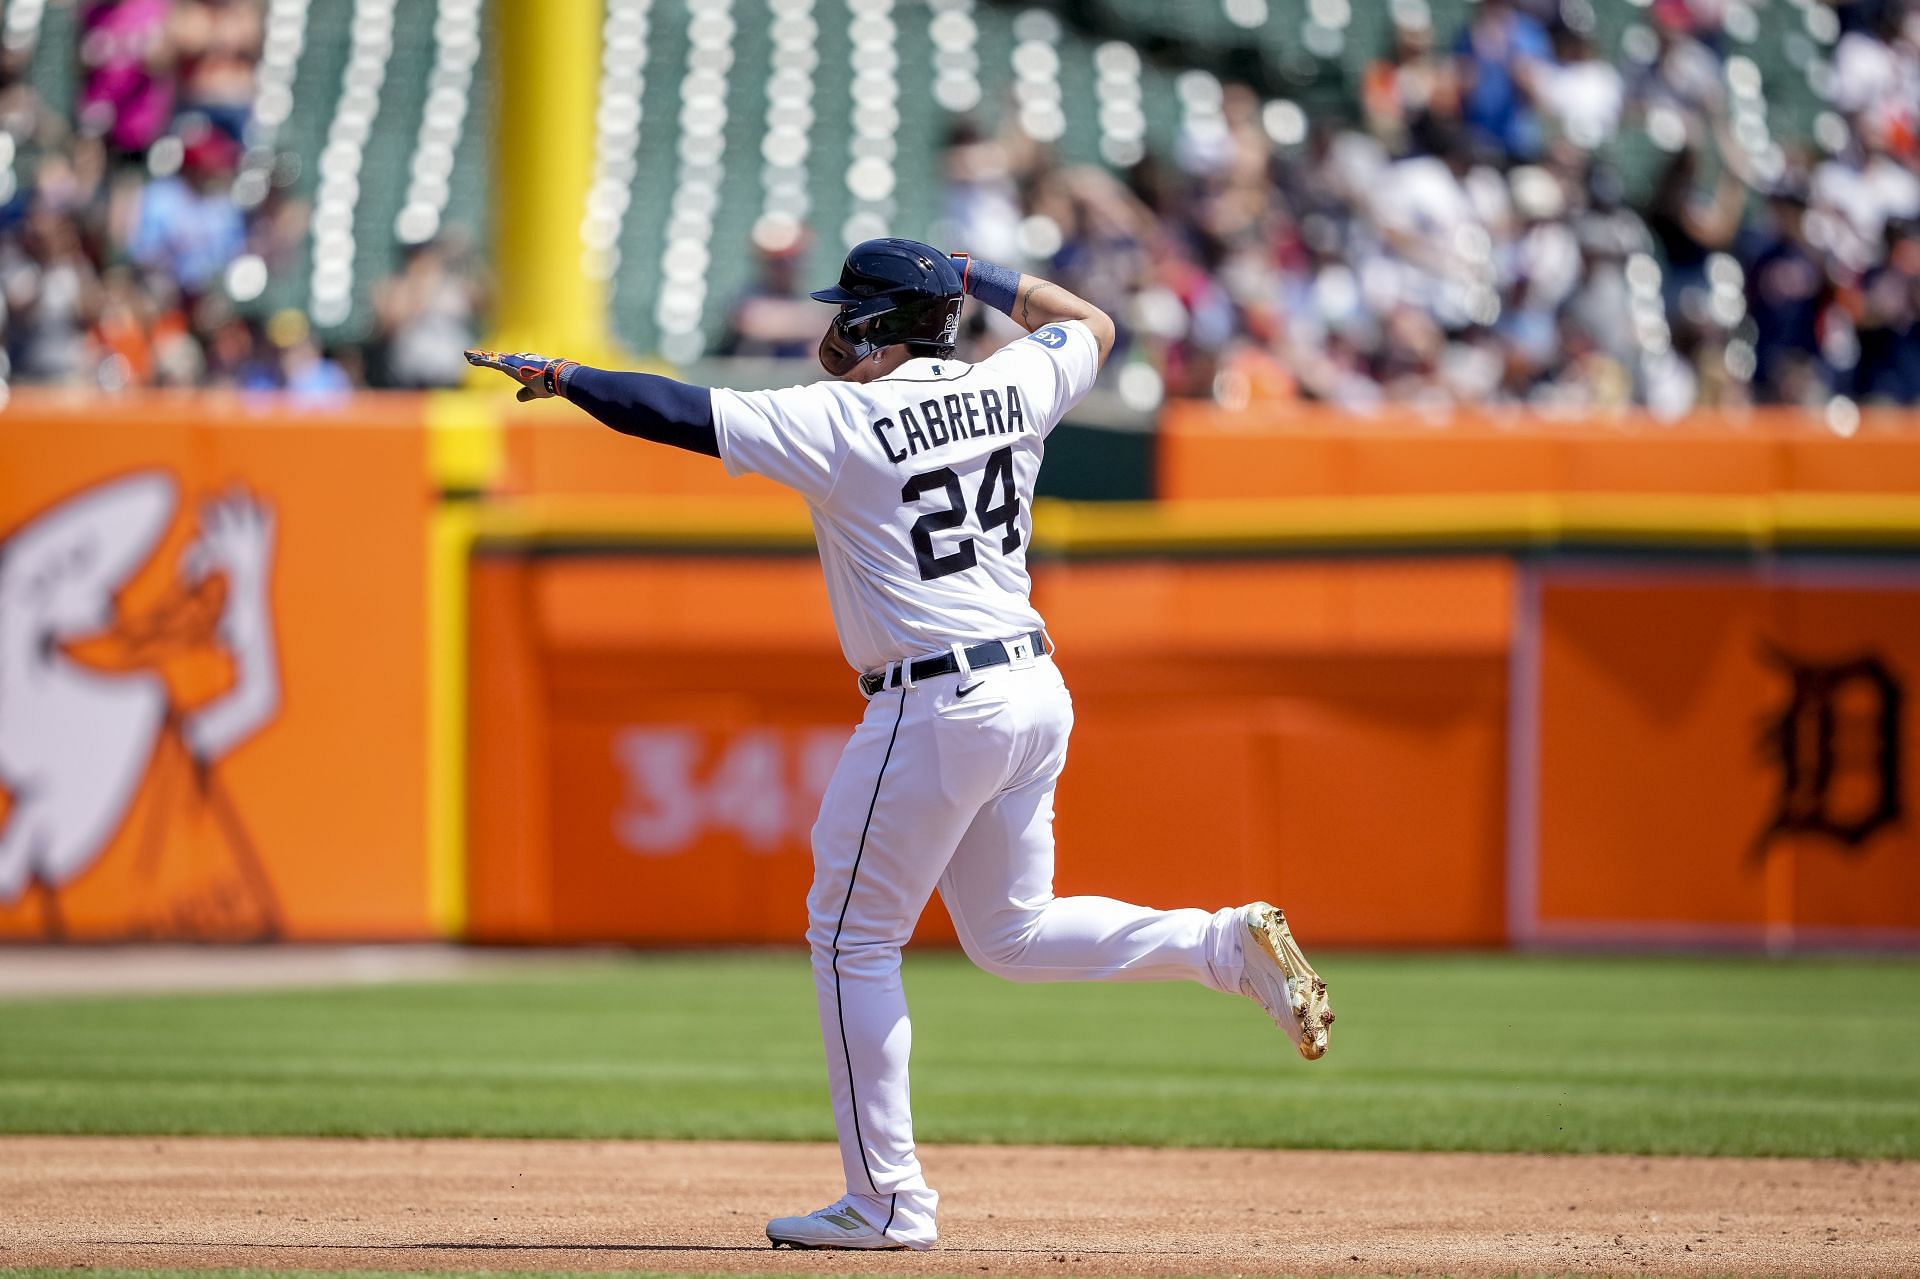 Cabrera rounds the bases at Comerica Park after belting a home run. 